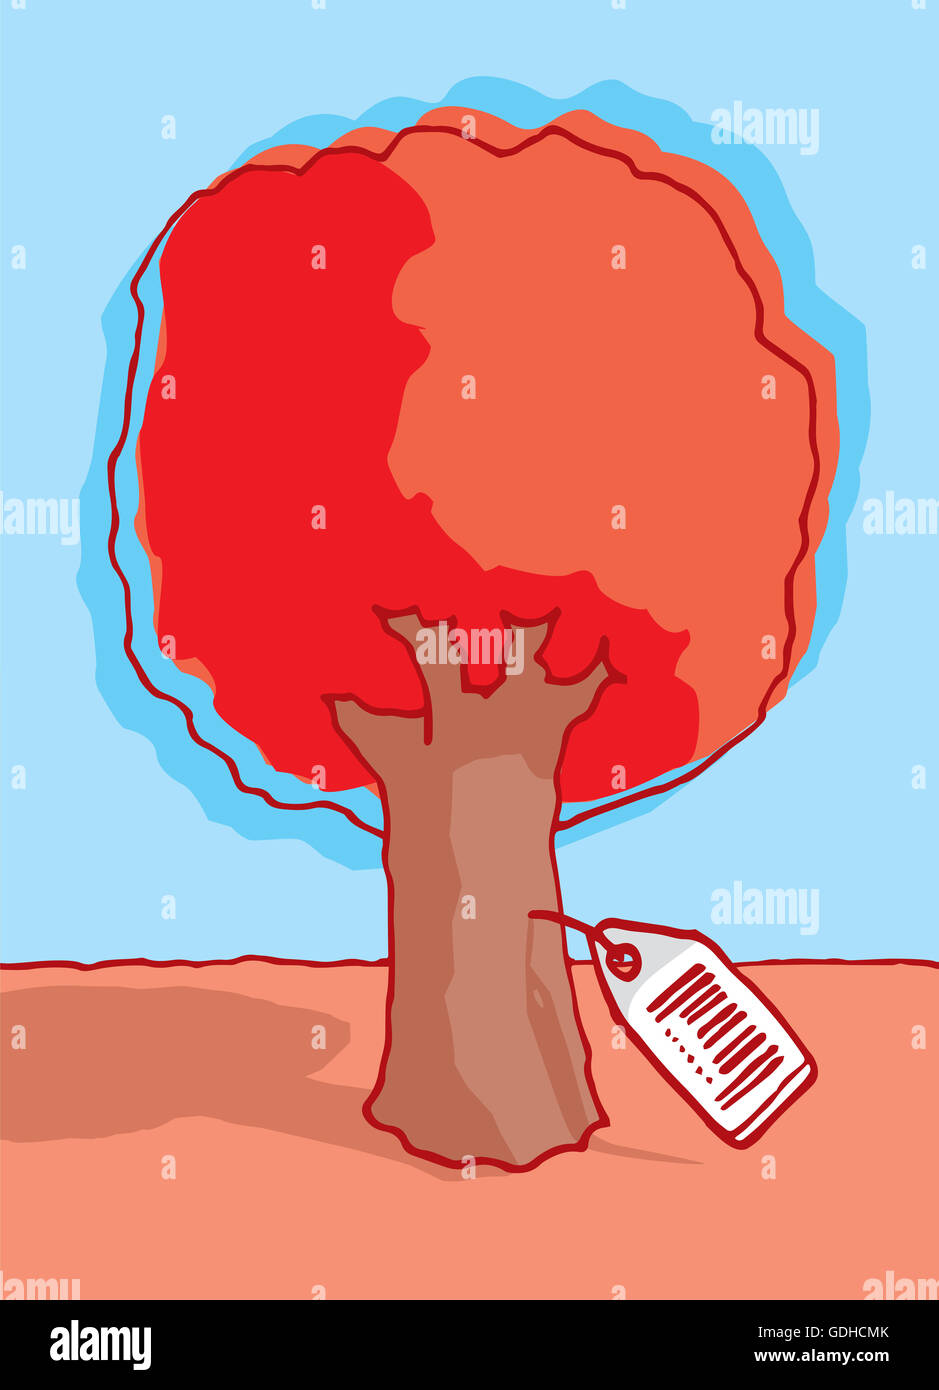 Cartoon illustration of a tree with price tag as valuable resource Stock Photo